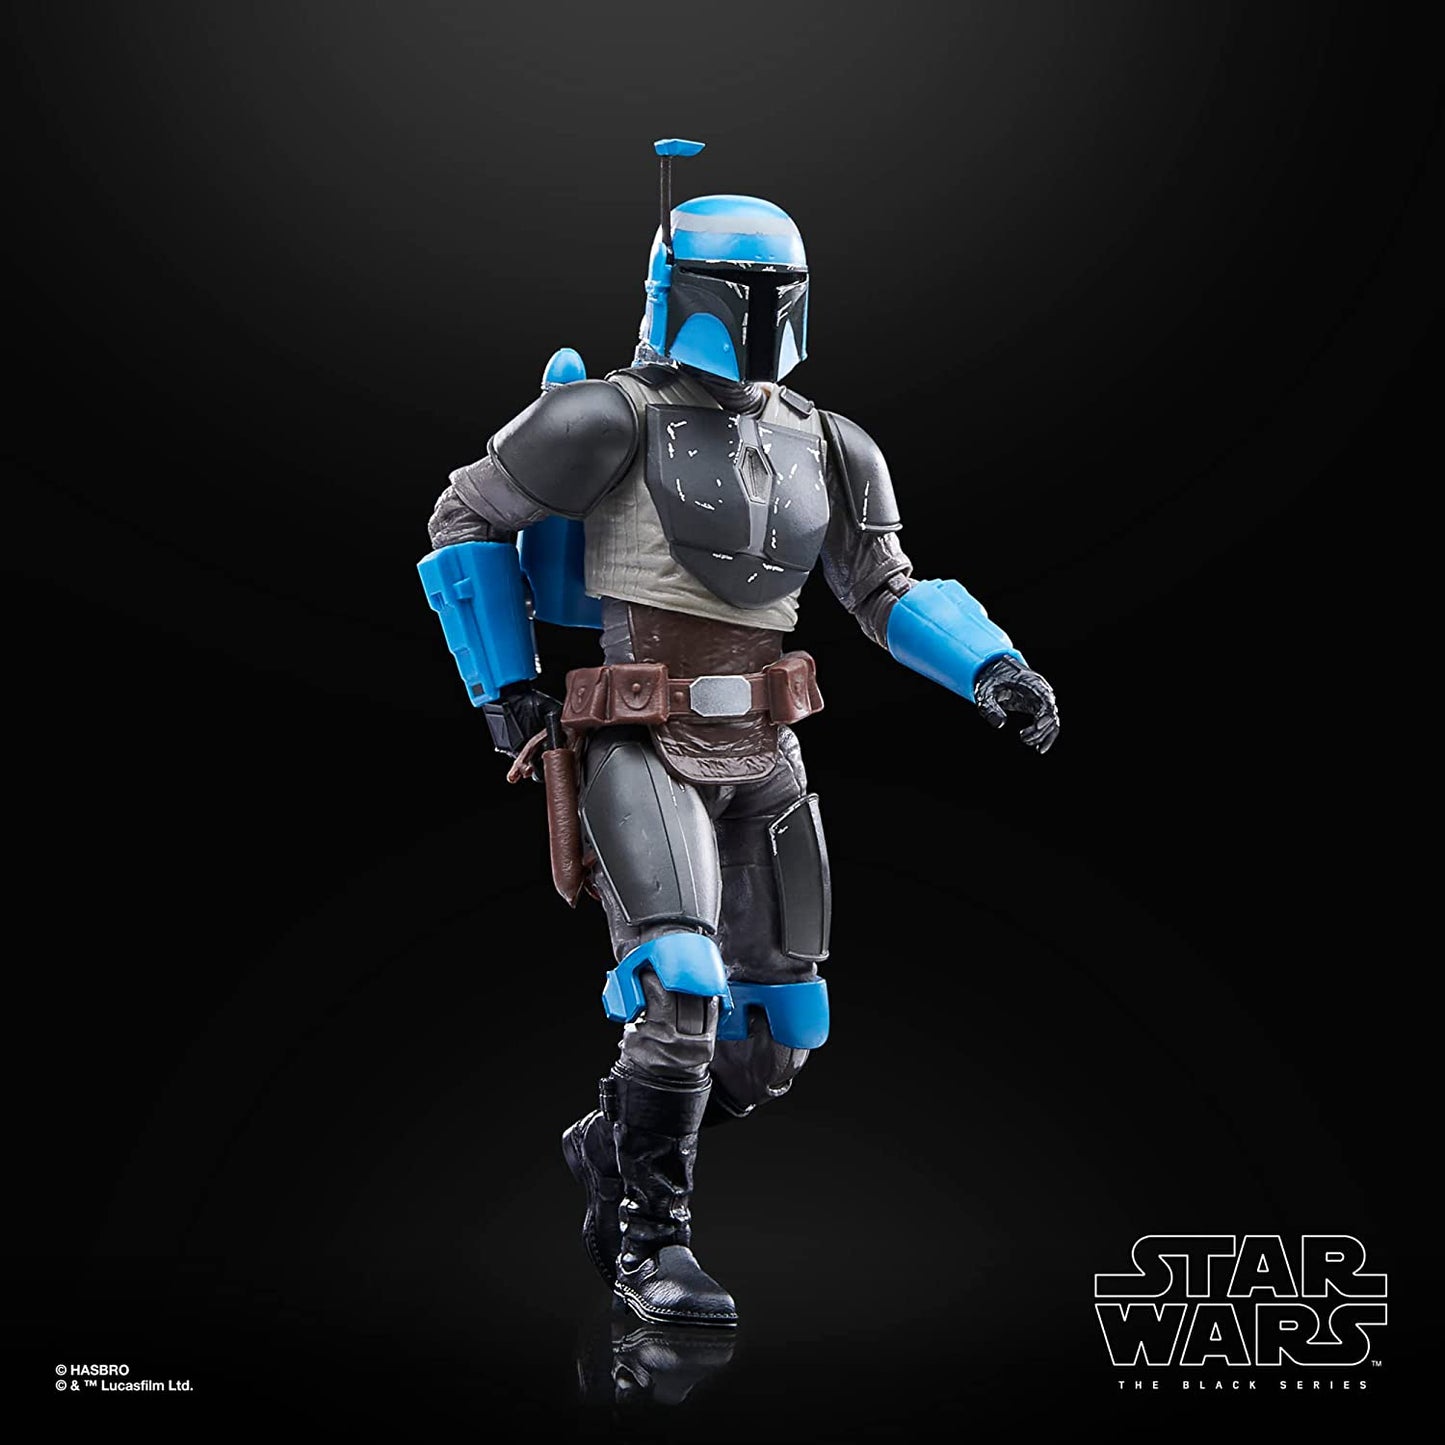 Star Wars The Black Series Axe Woves (The Mandalorian) 6-Inch Action Figure Toy